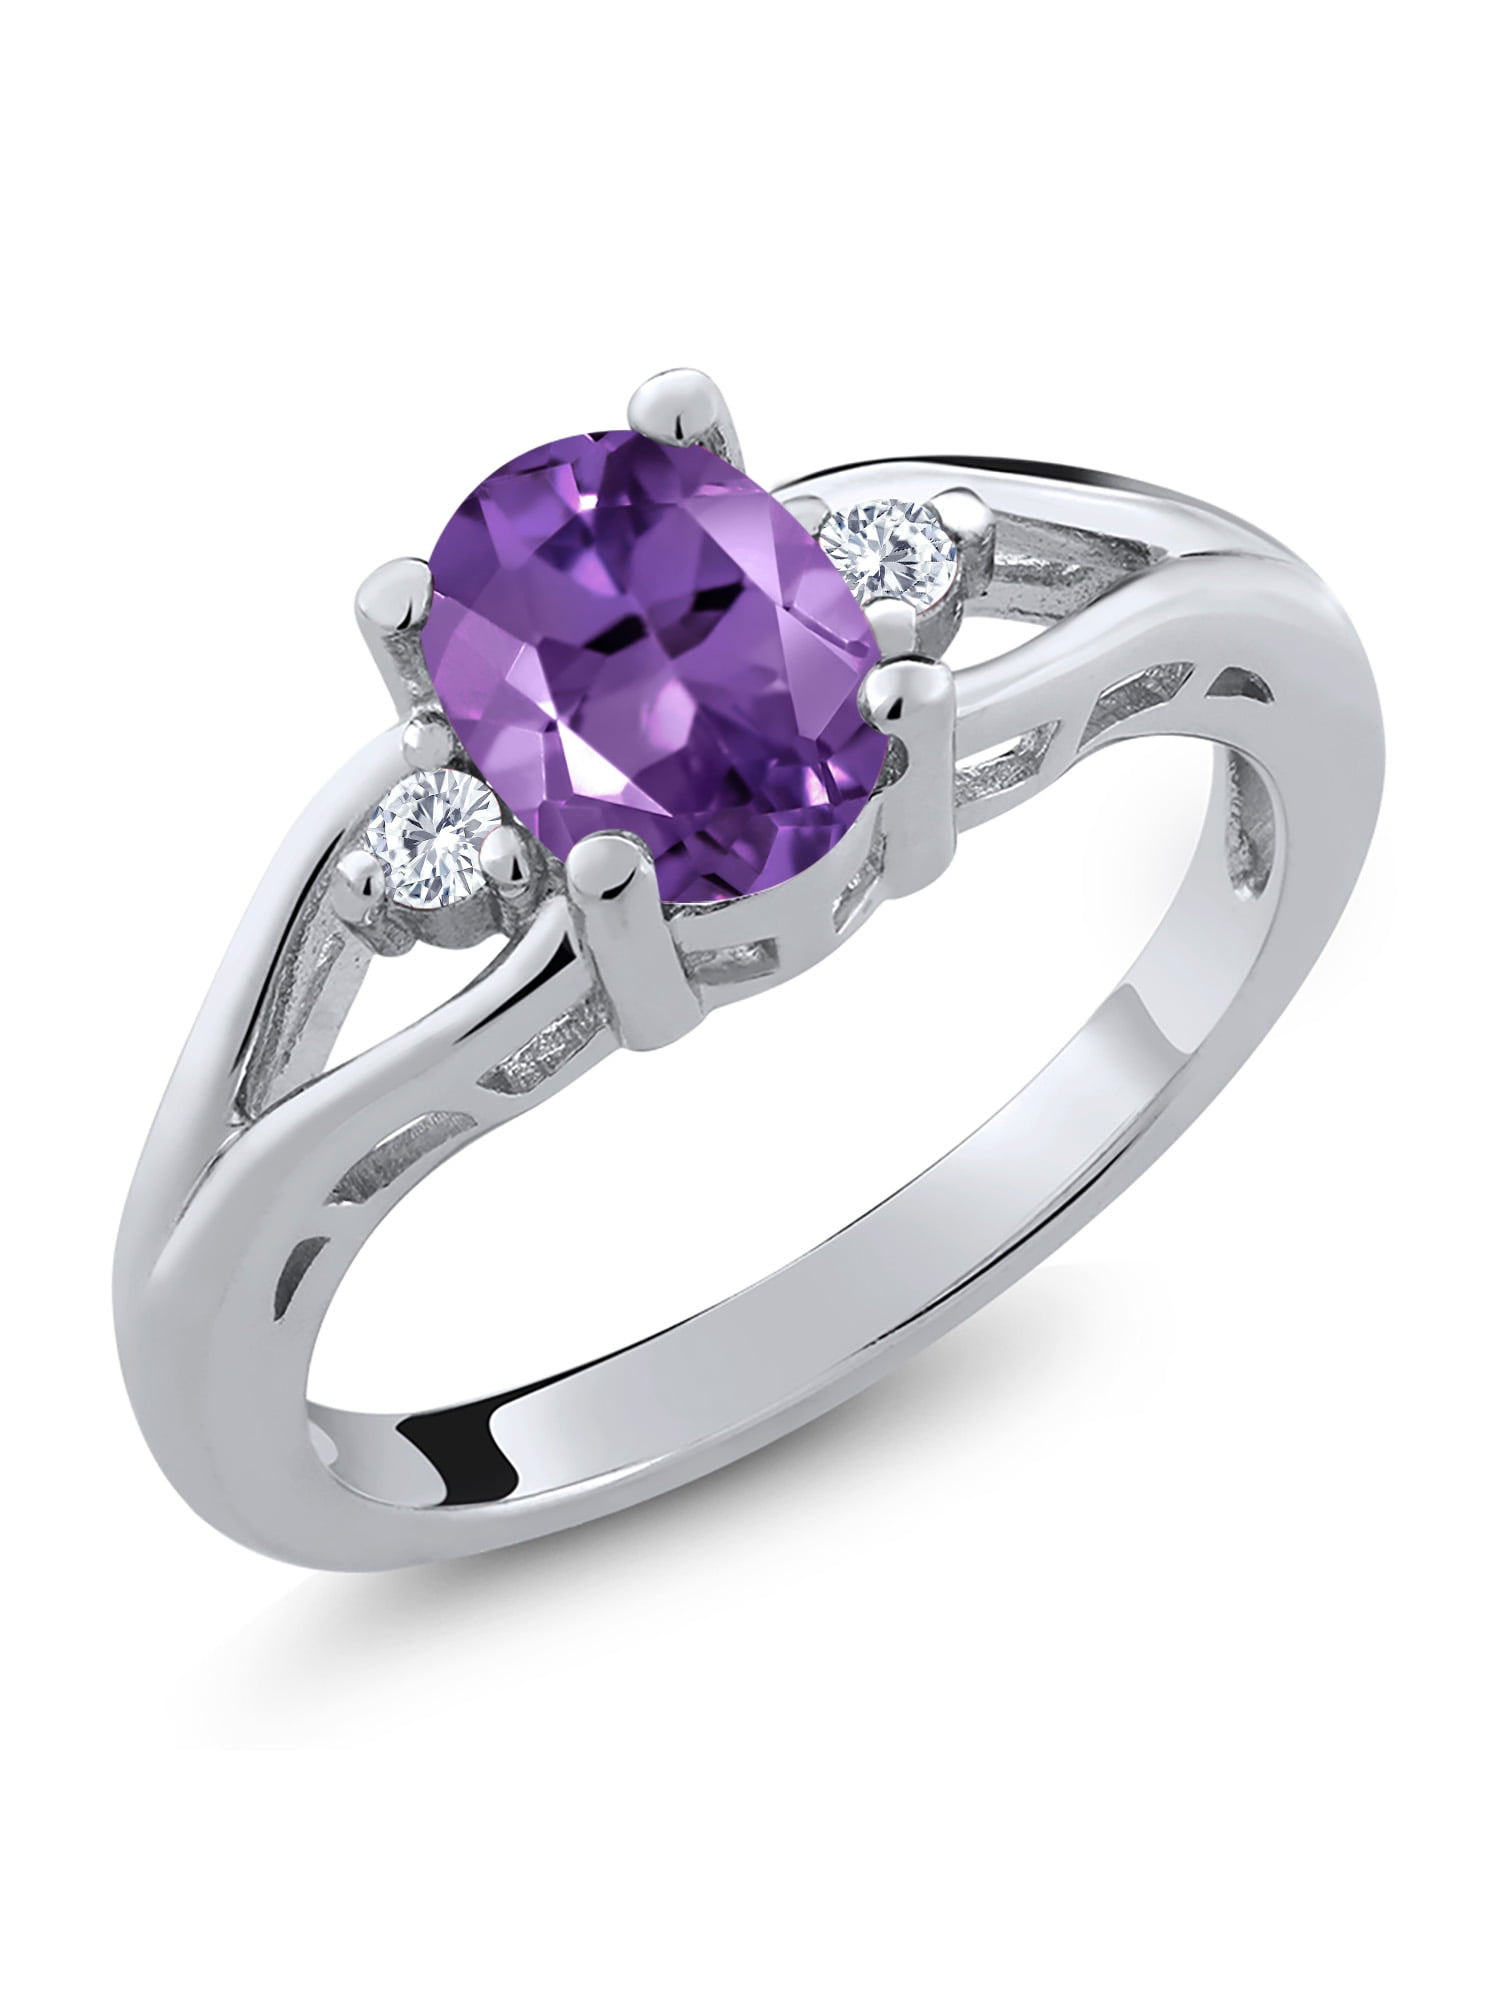 Solid 925 Sterling Silver Tarnish Free Ring With Moissanite and Amethyst Moissanite Women's Ring Anniversary Ring Amethyst Ring For Her